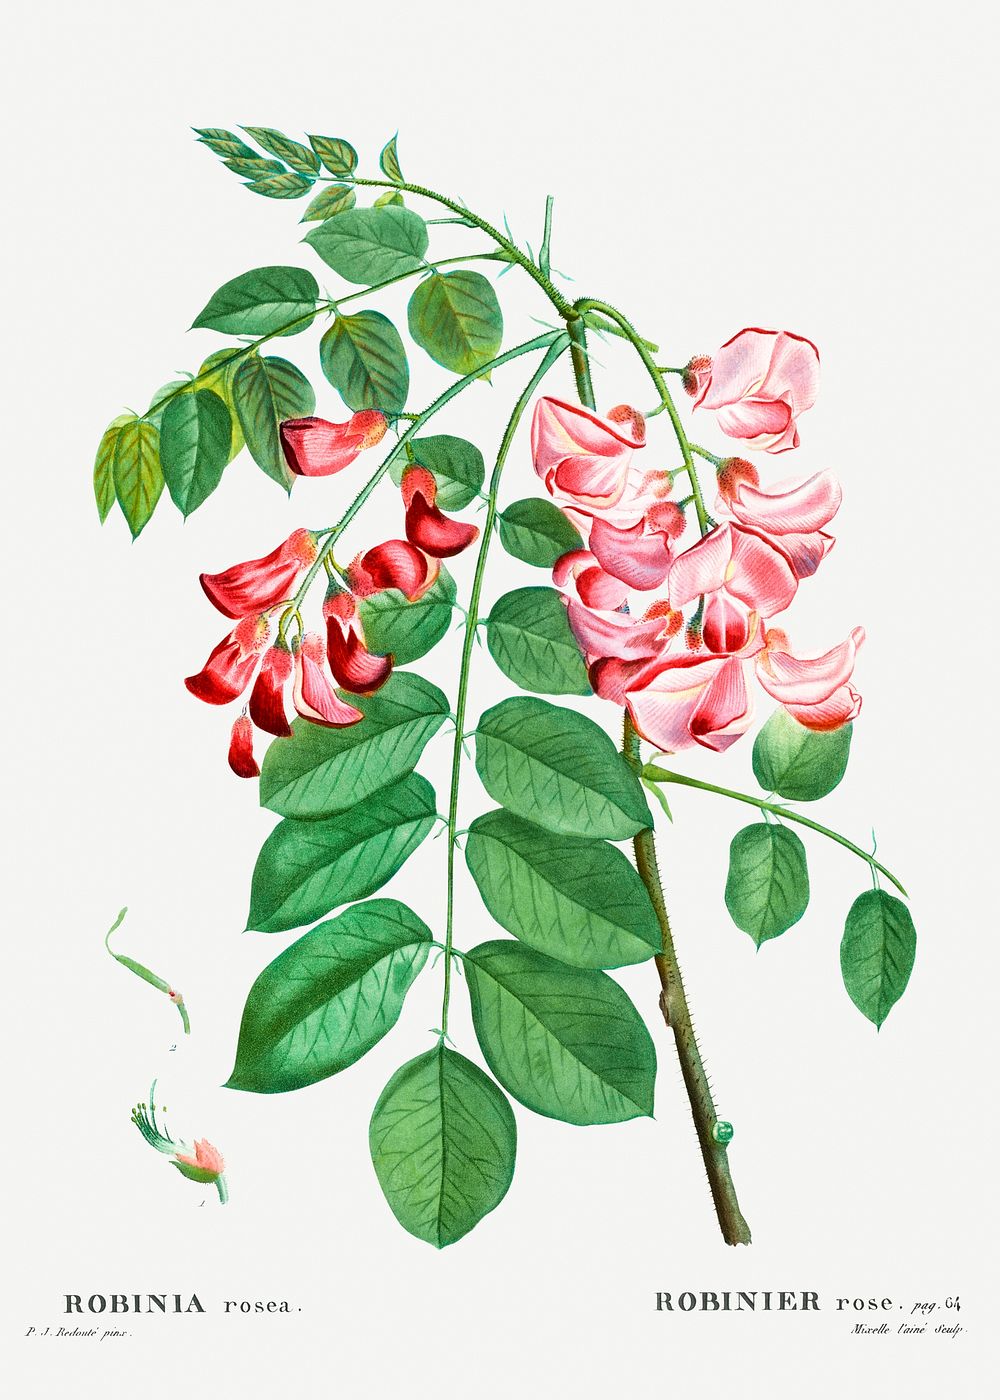 Robinia rosea (Robinier rose) from Traité | Free Photo Illustration ...